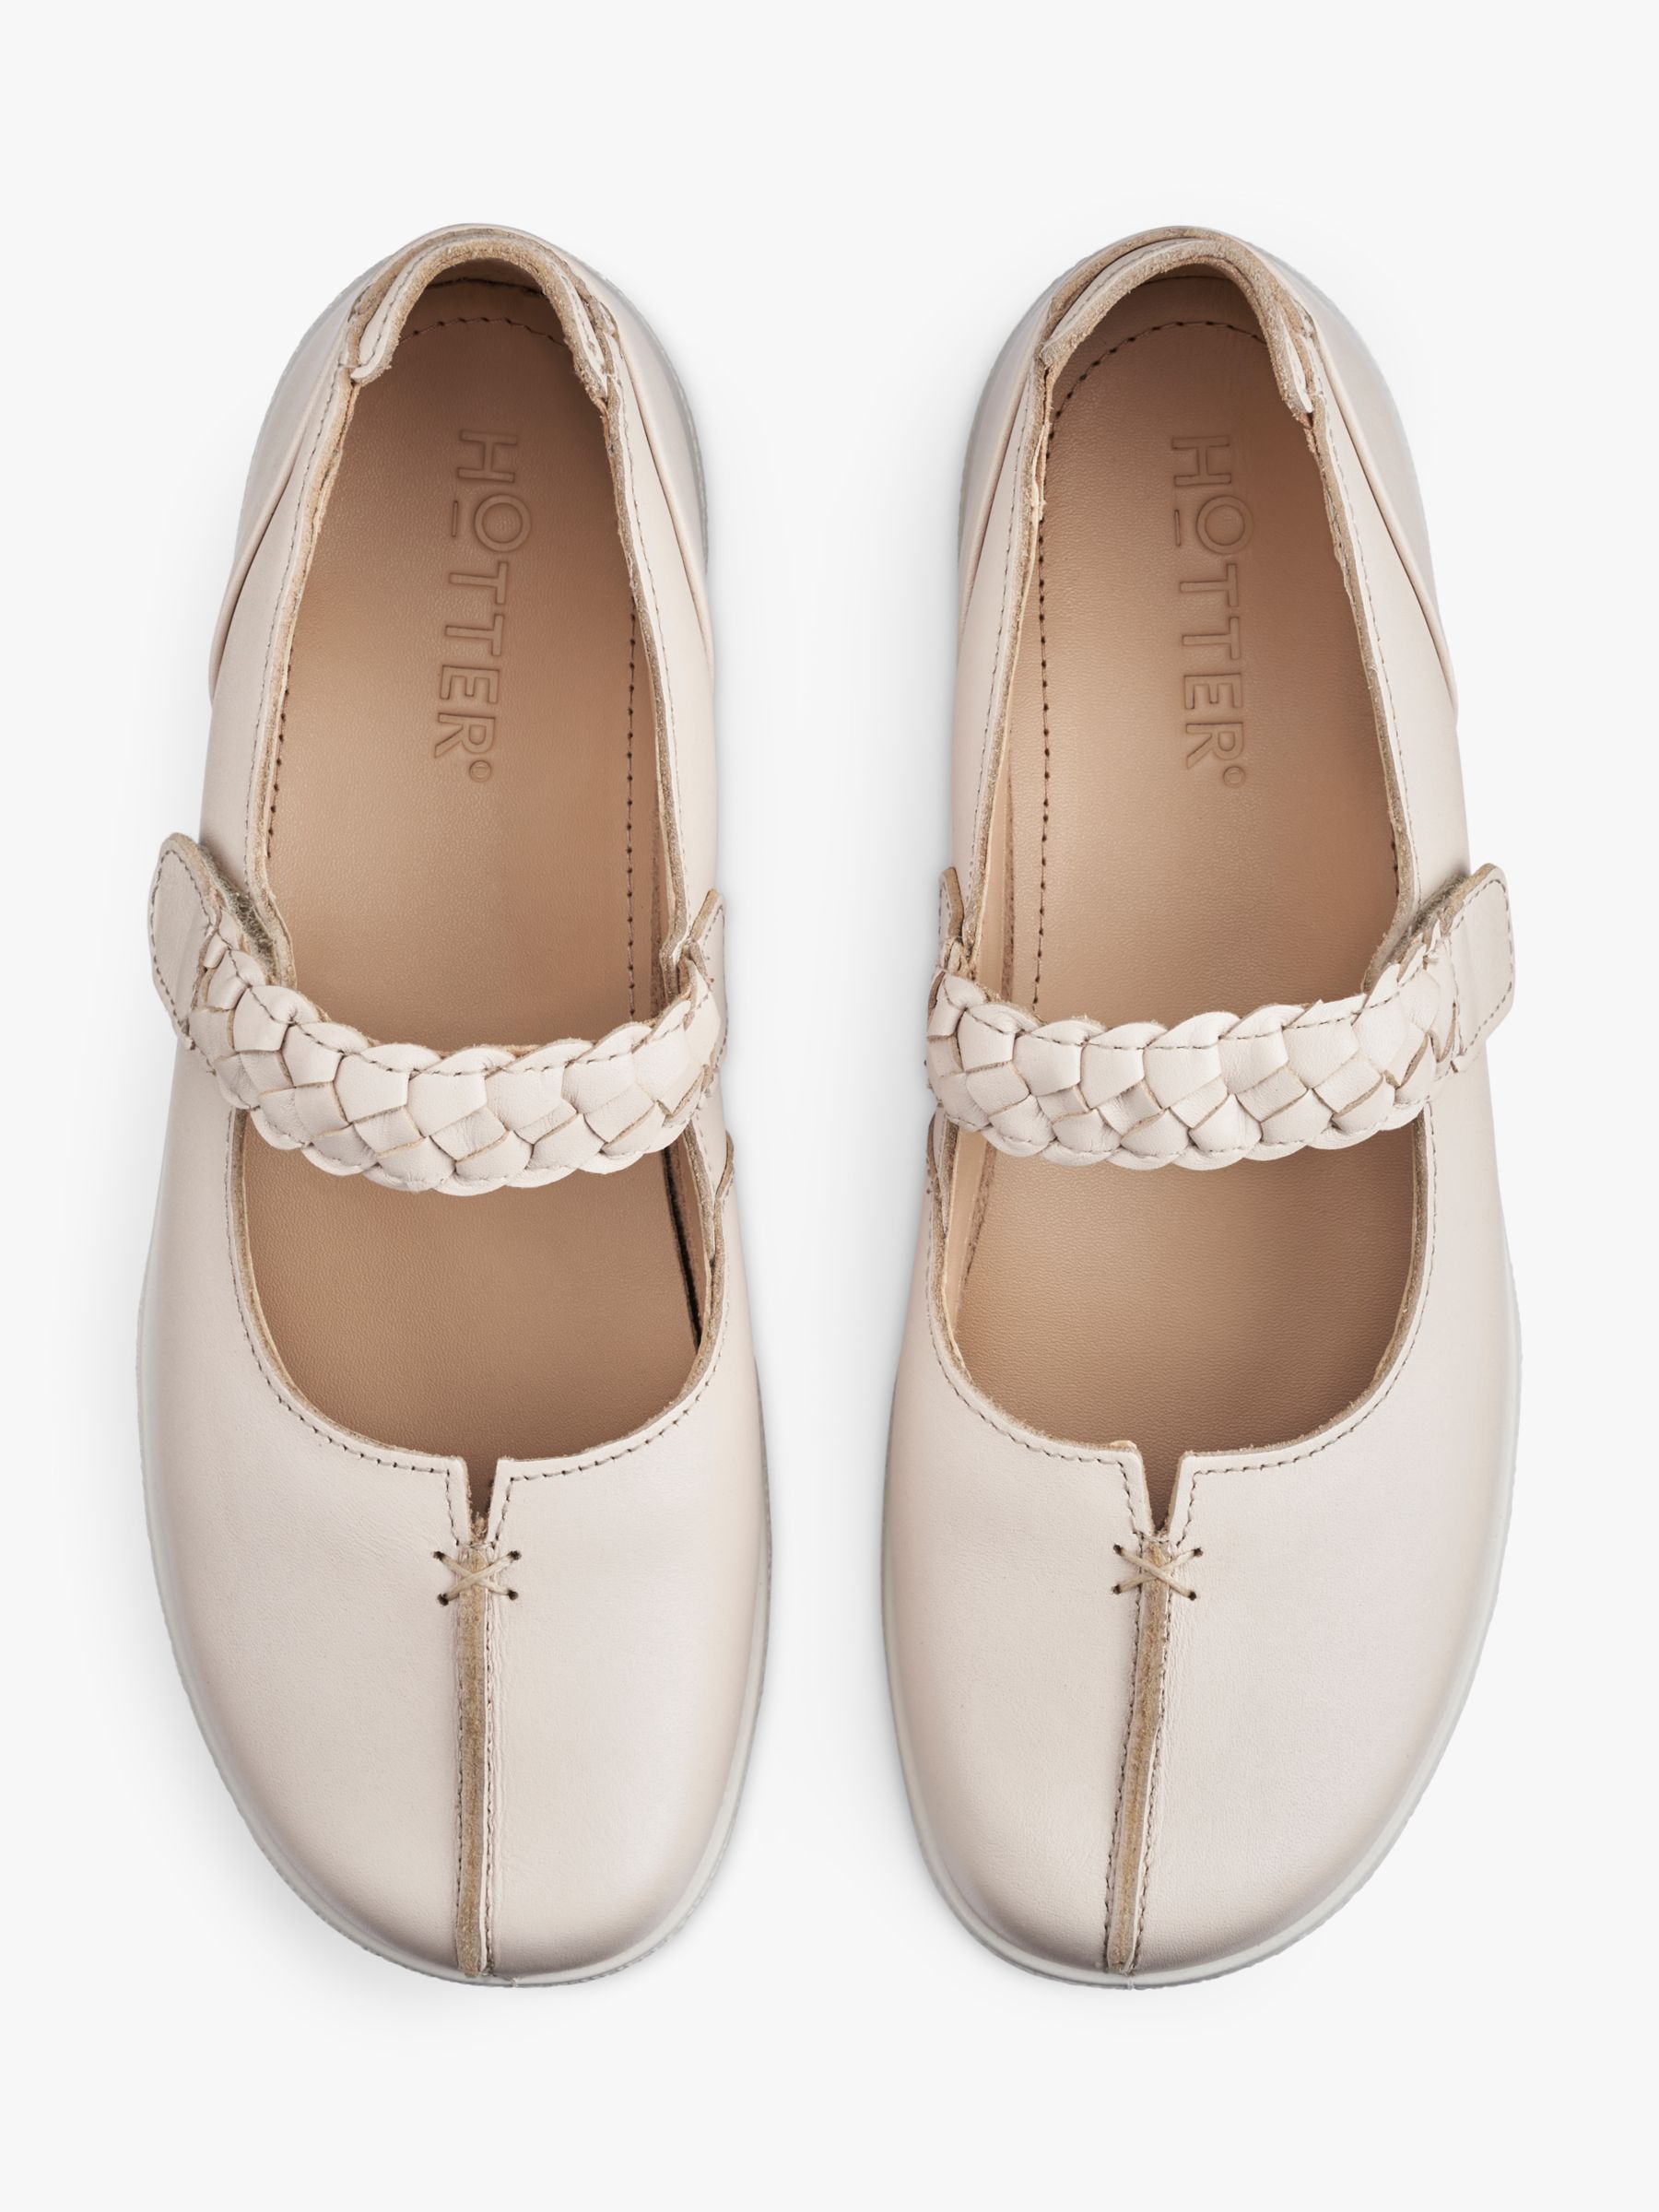 Buy Hotter Shake II Classic Mary Jane Shoes Online at johnlewis.com